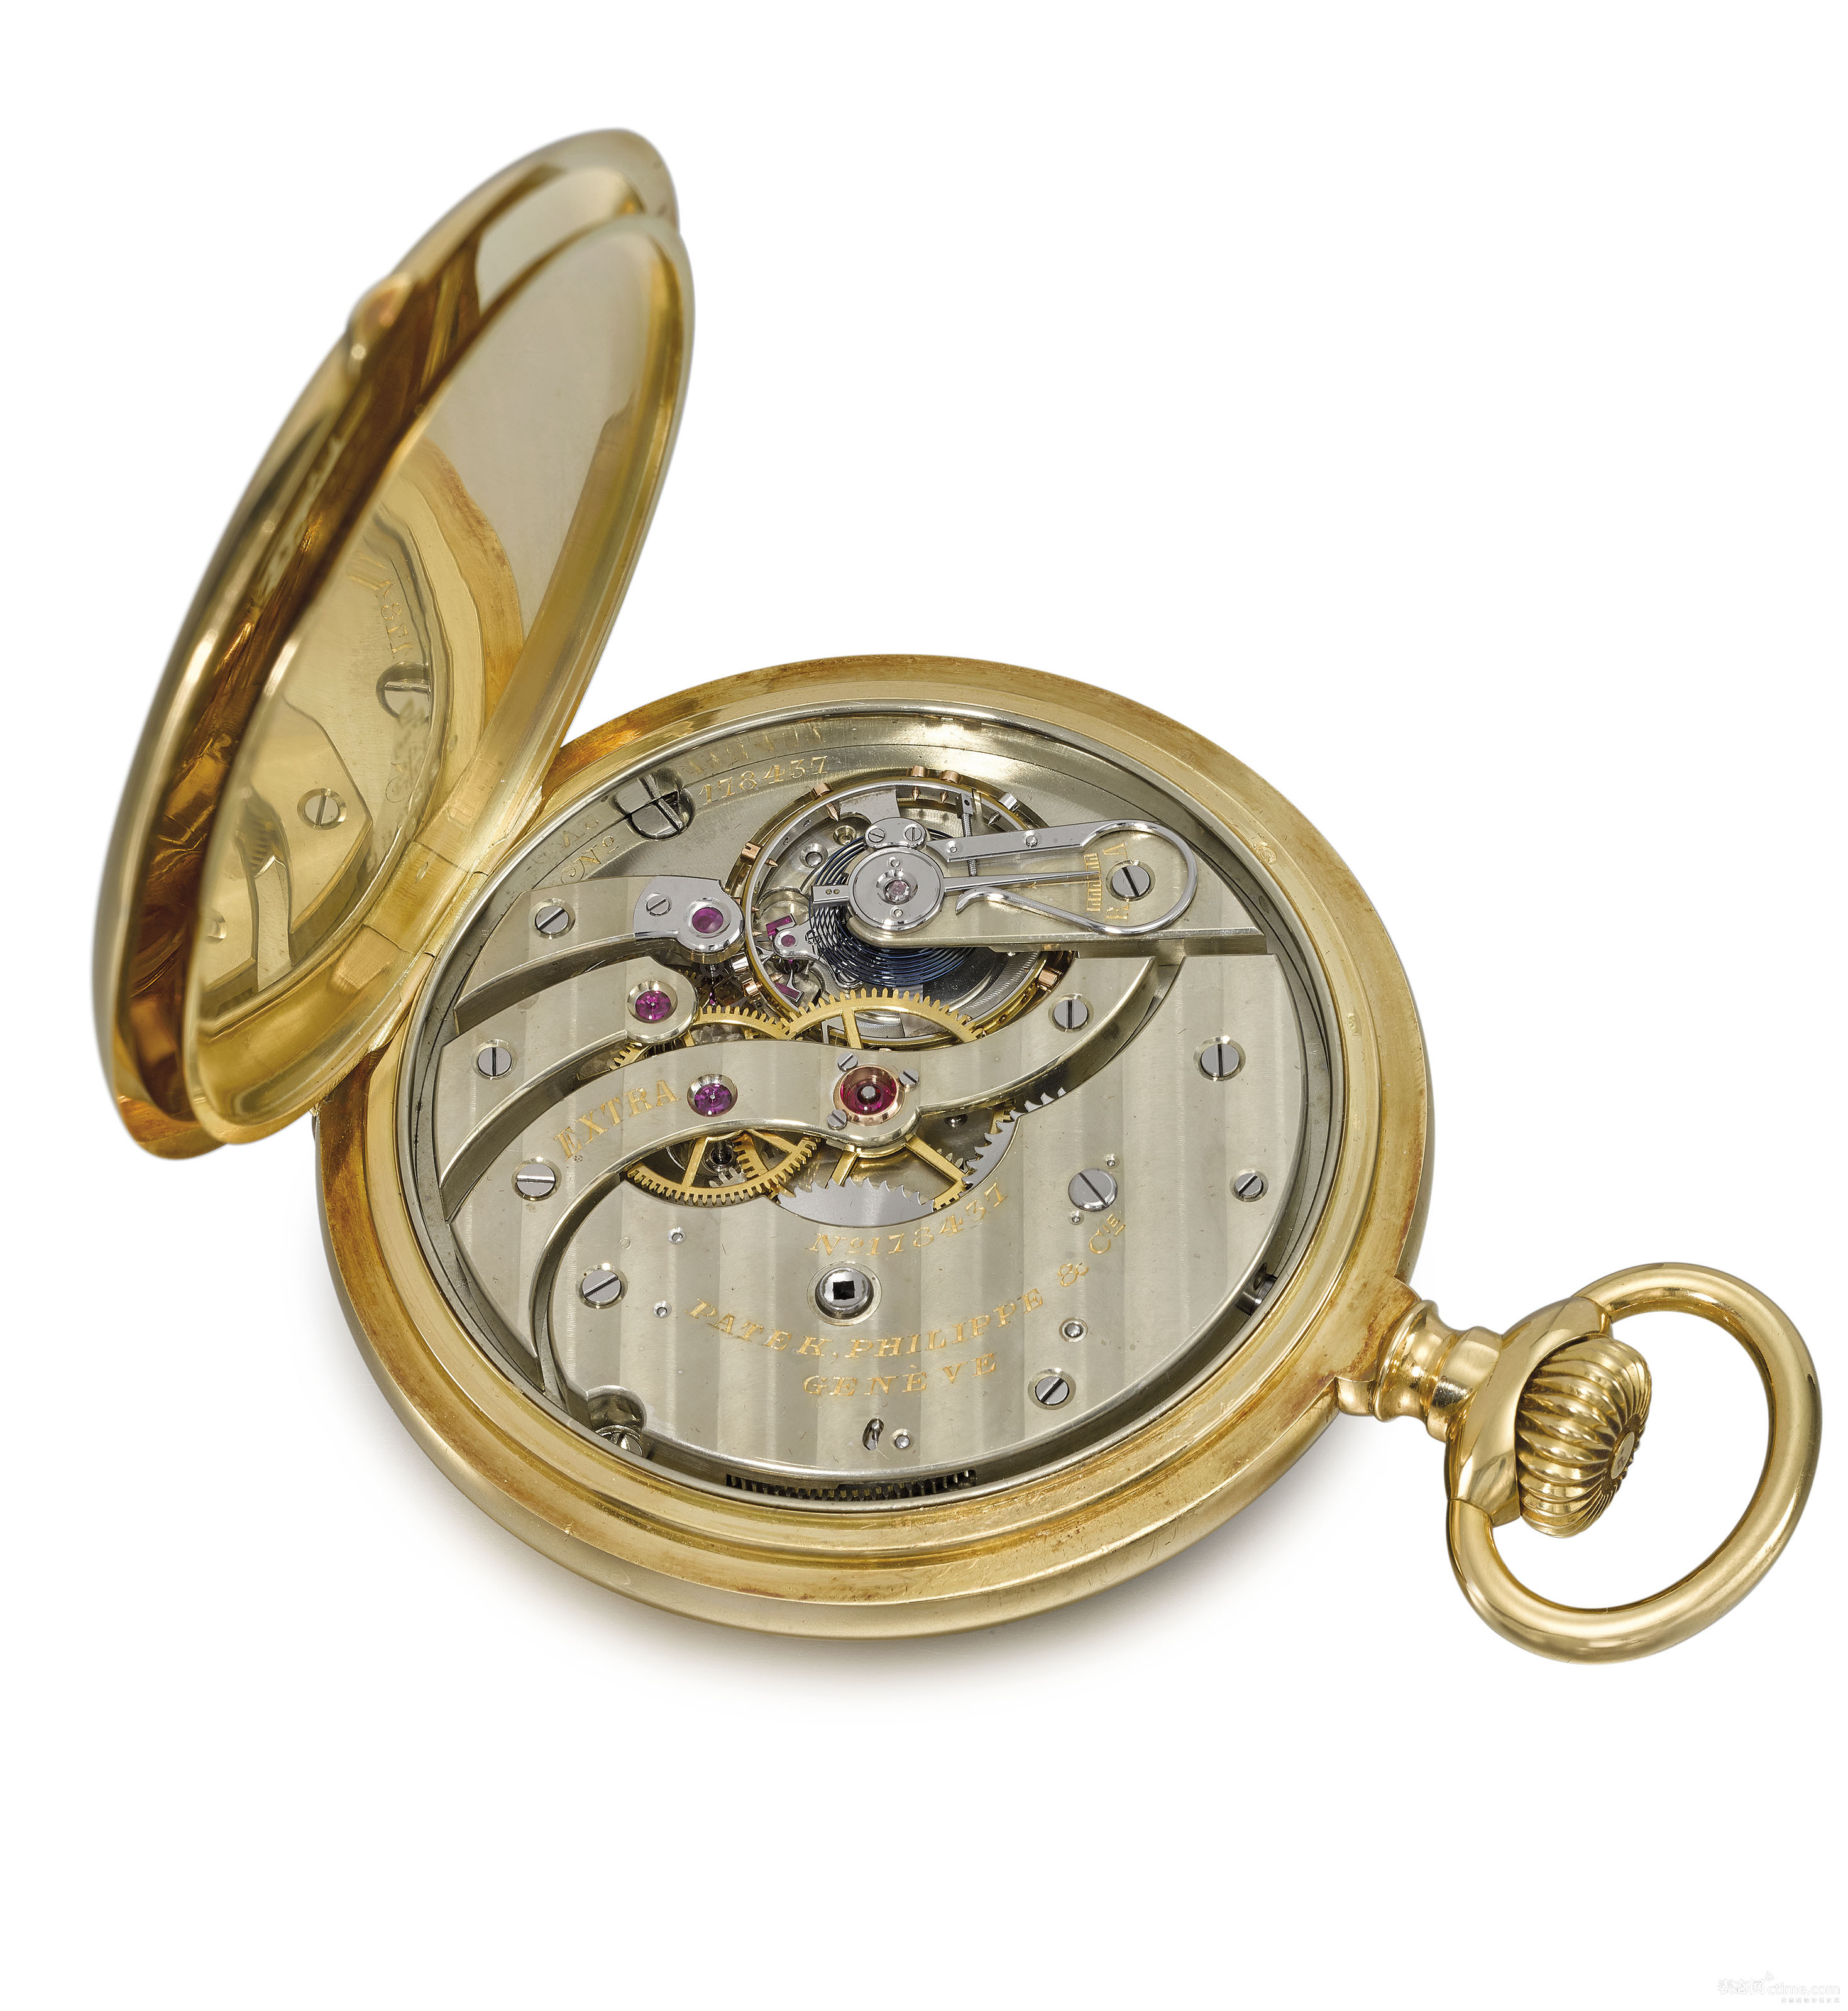 2019_GNV_17290_0245_002(patek_philippe_an_extremely_fine_very_rare_and_large_18k_gold_observat).jpg